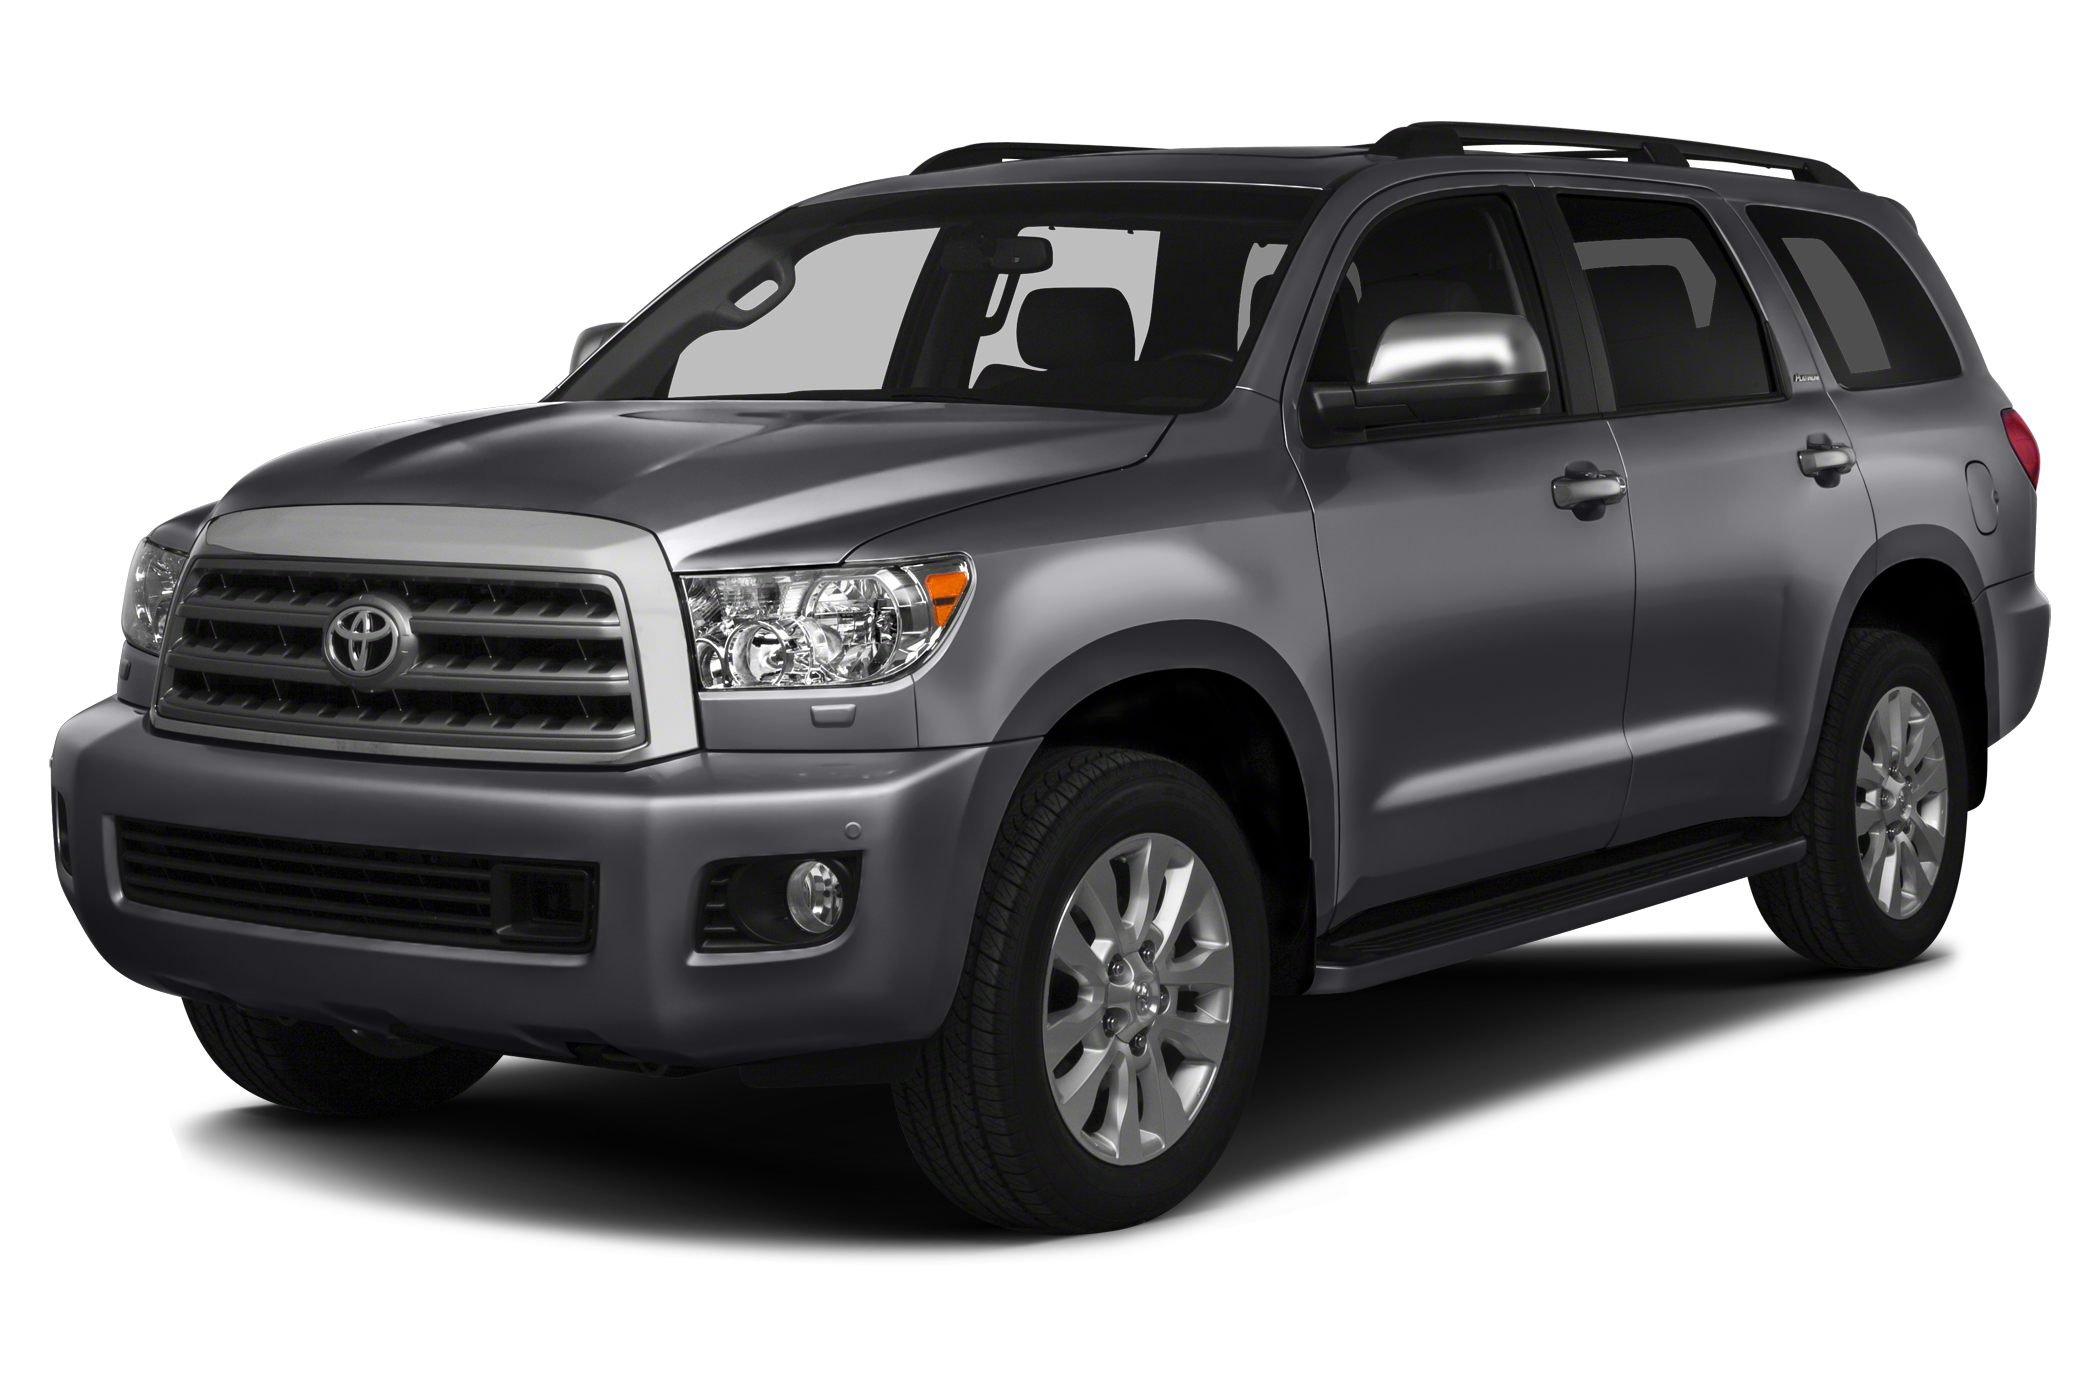 2013 Toyota Sequoia oem parts and accessories on sale